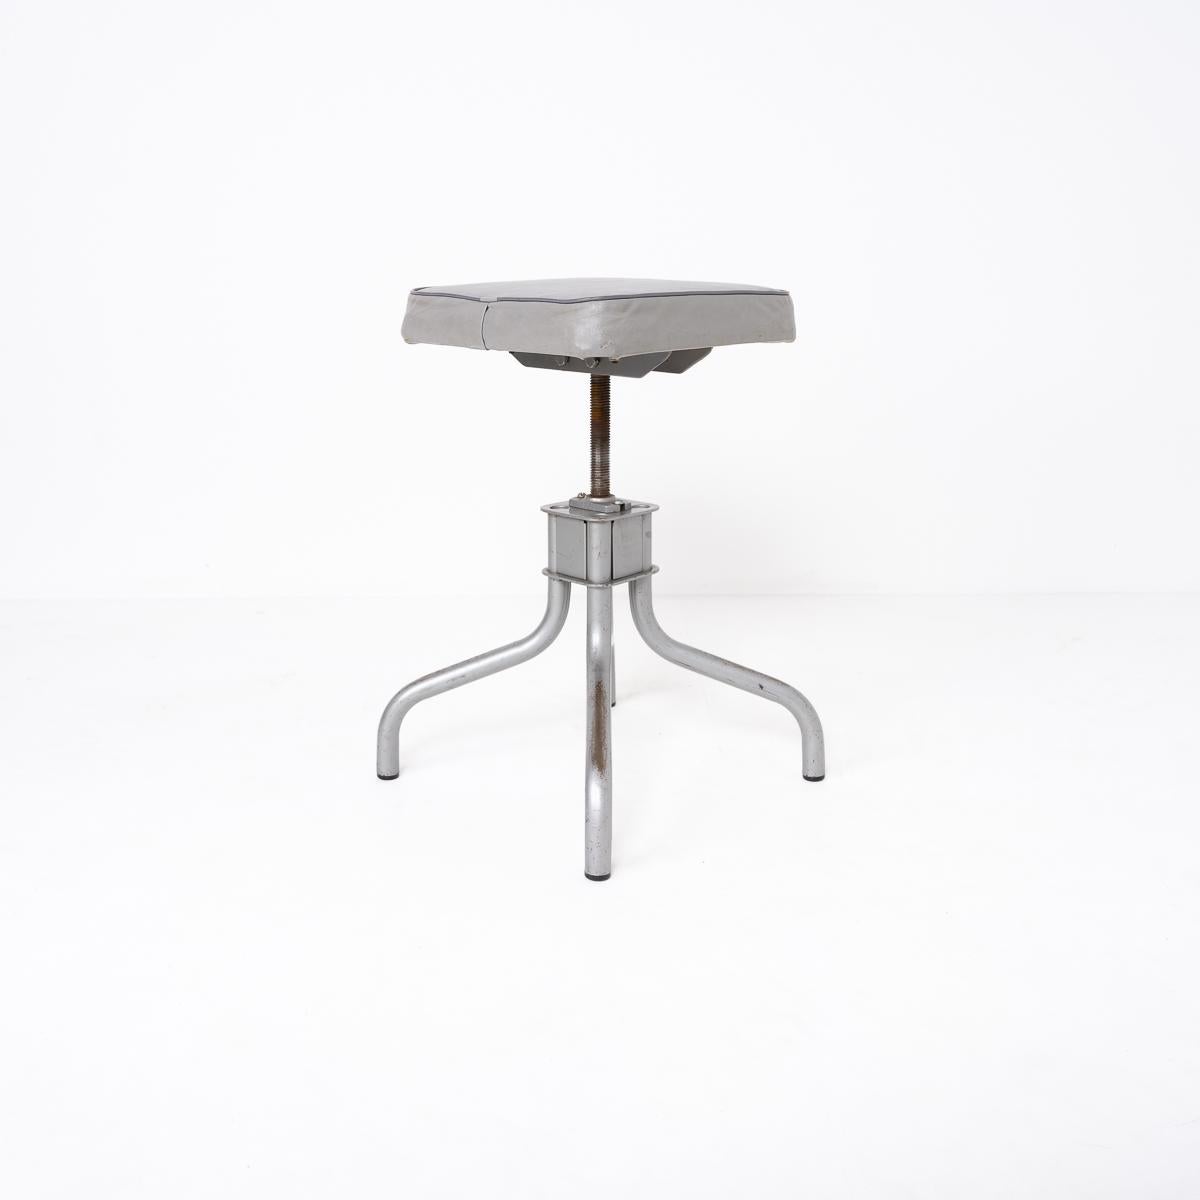 British Reclaimed Industrial Factory Height Adjustable Stools By Leabank Chairs Ltd For Sale